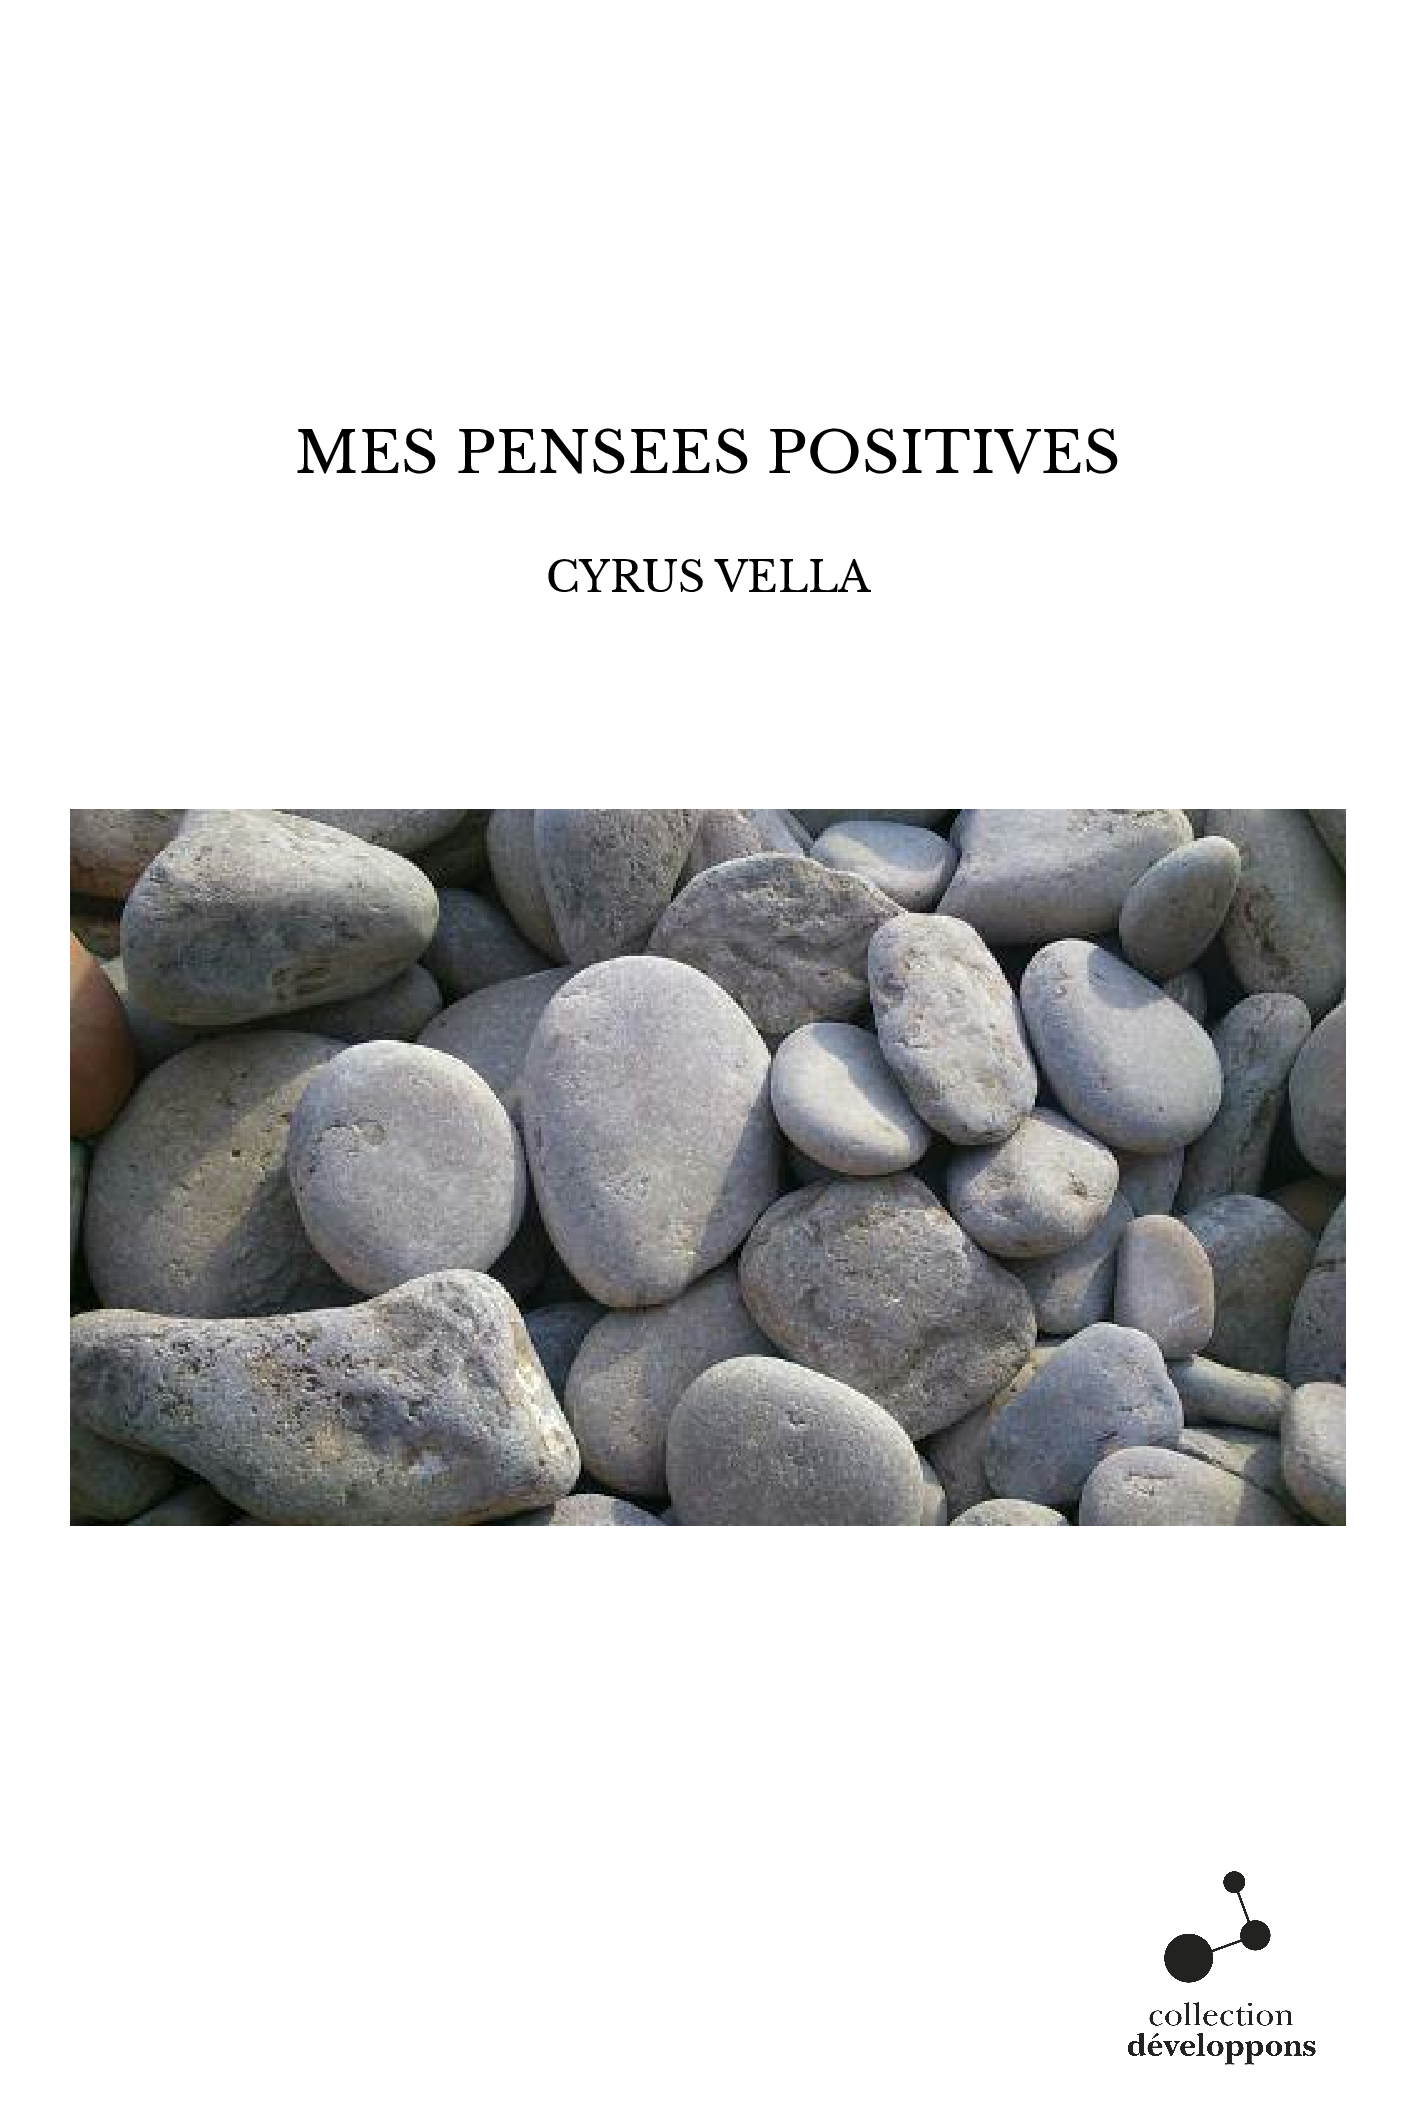 MES PENSEES POSITIVES